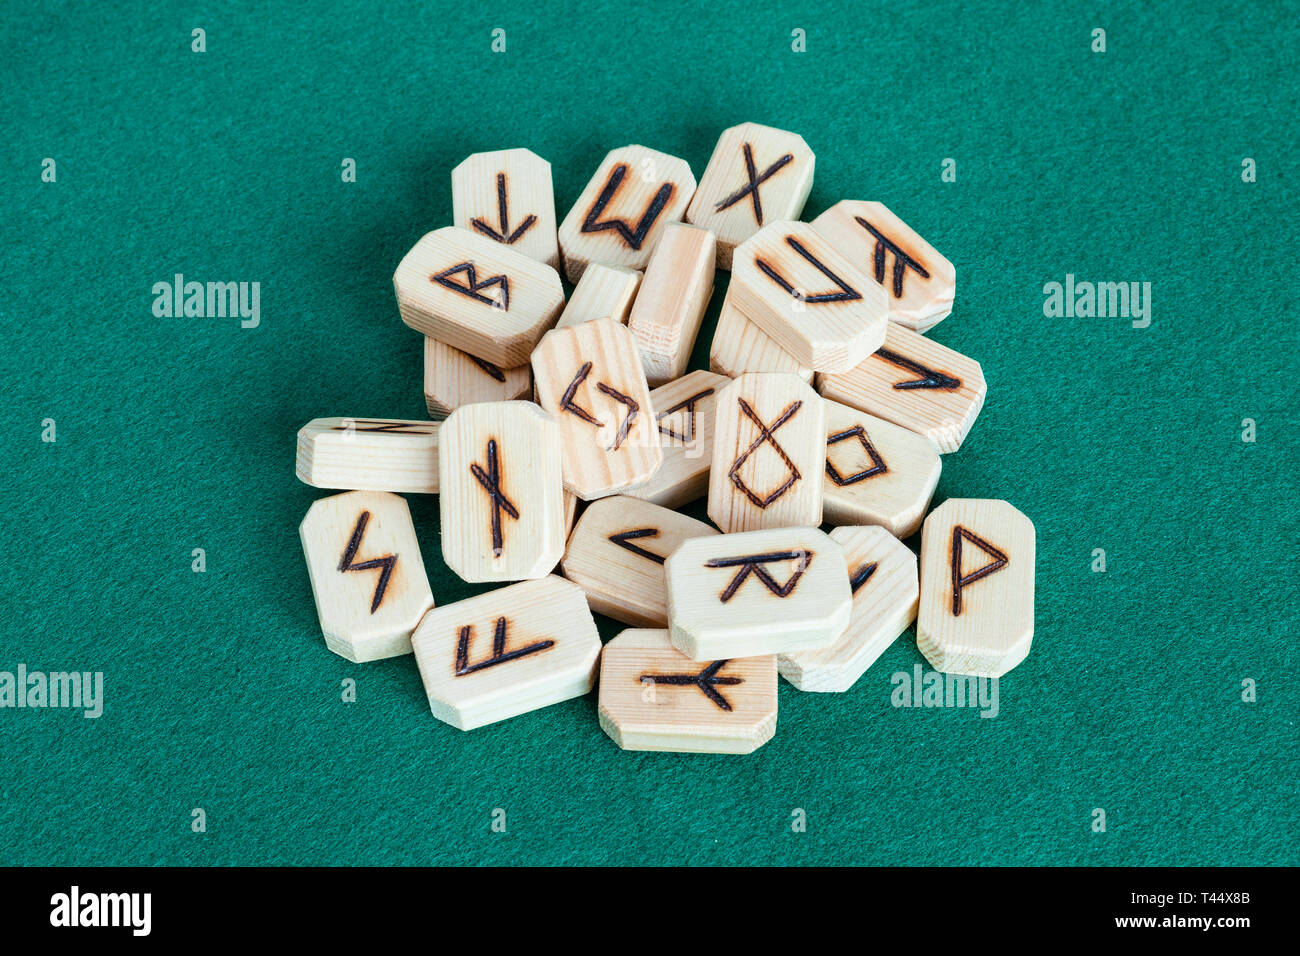 MOSCOW, RUSSIA - APRIL 3, 2019: pile of wooden tiles with fortunetelling runes on green baize table. Runes are the letters in various ancient Germanic Stock Photo